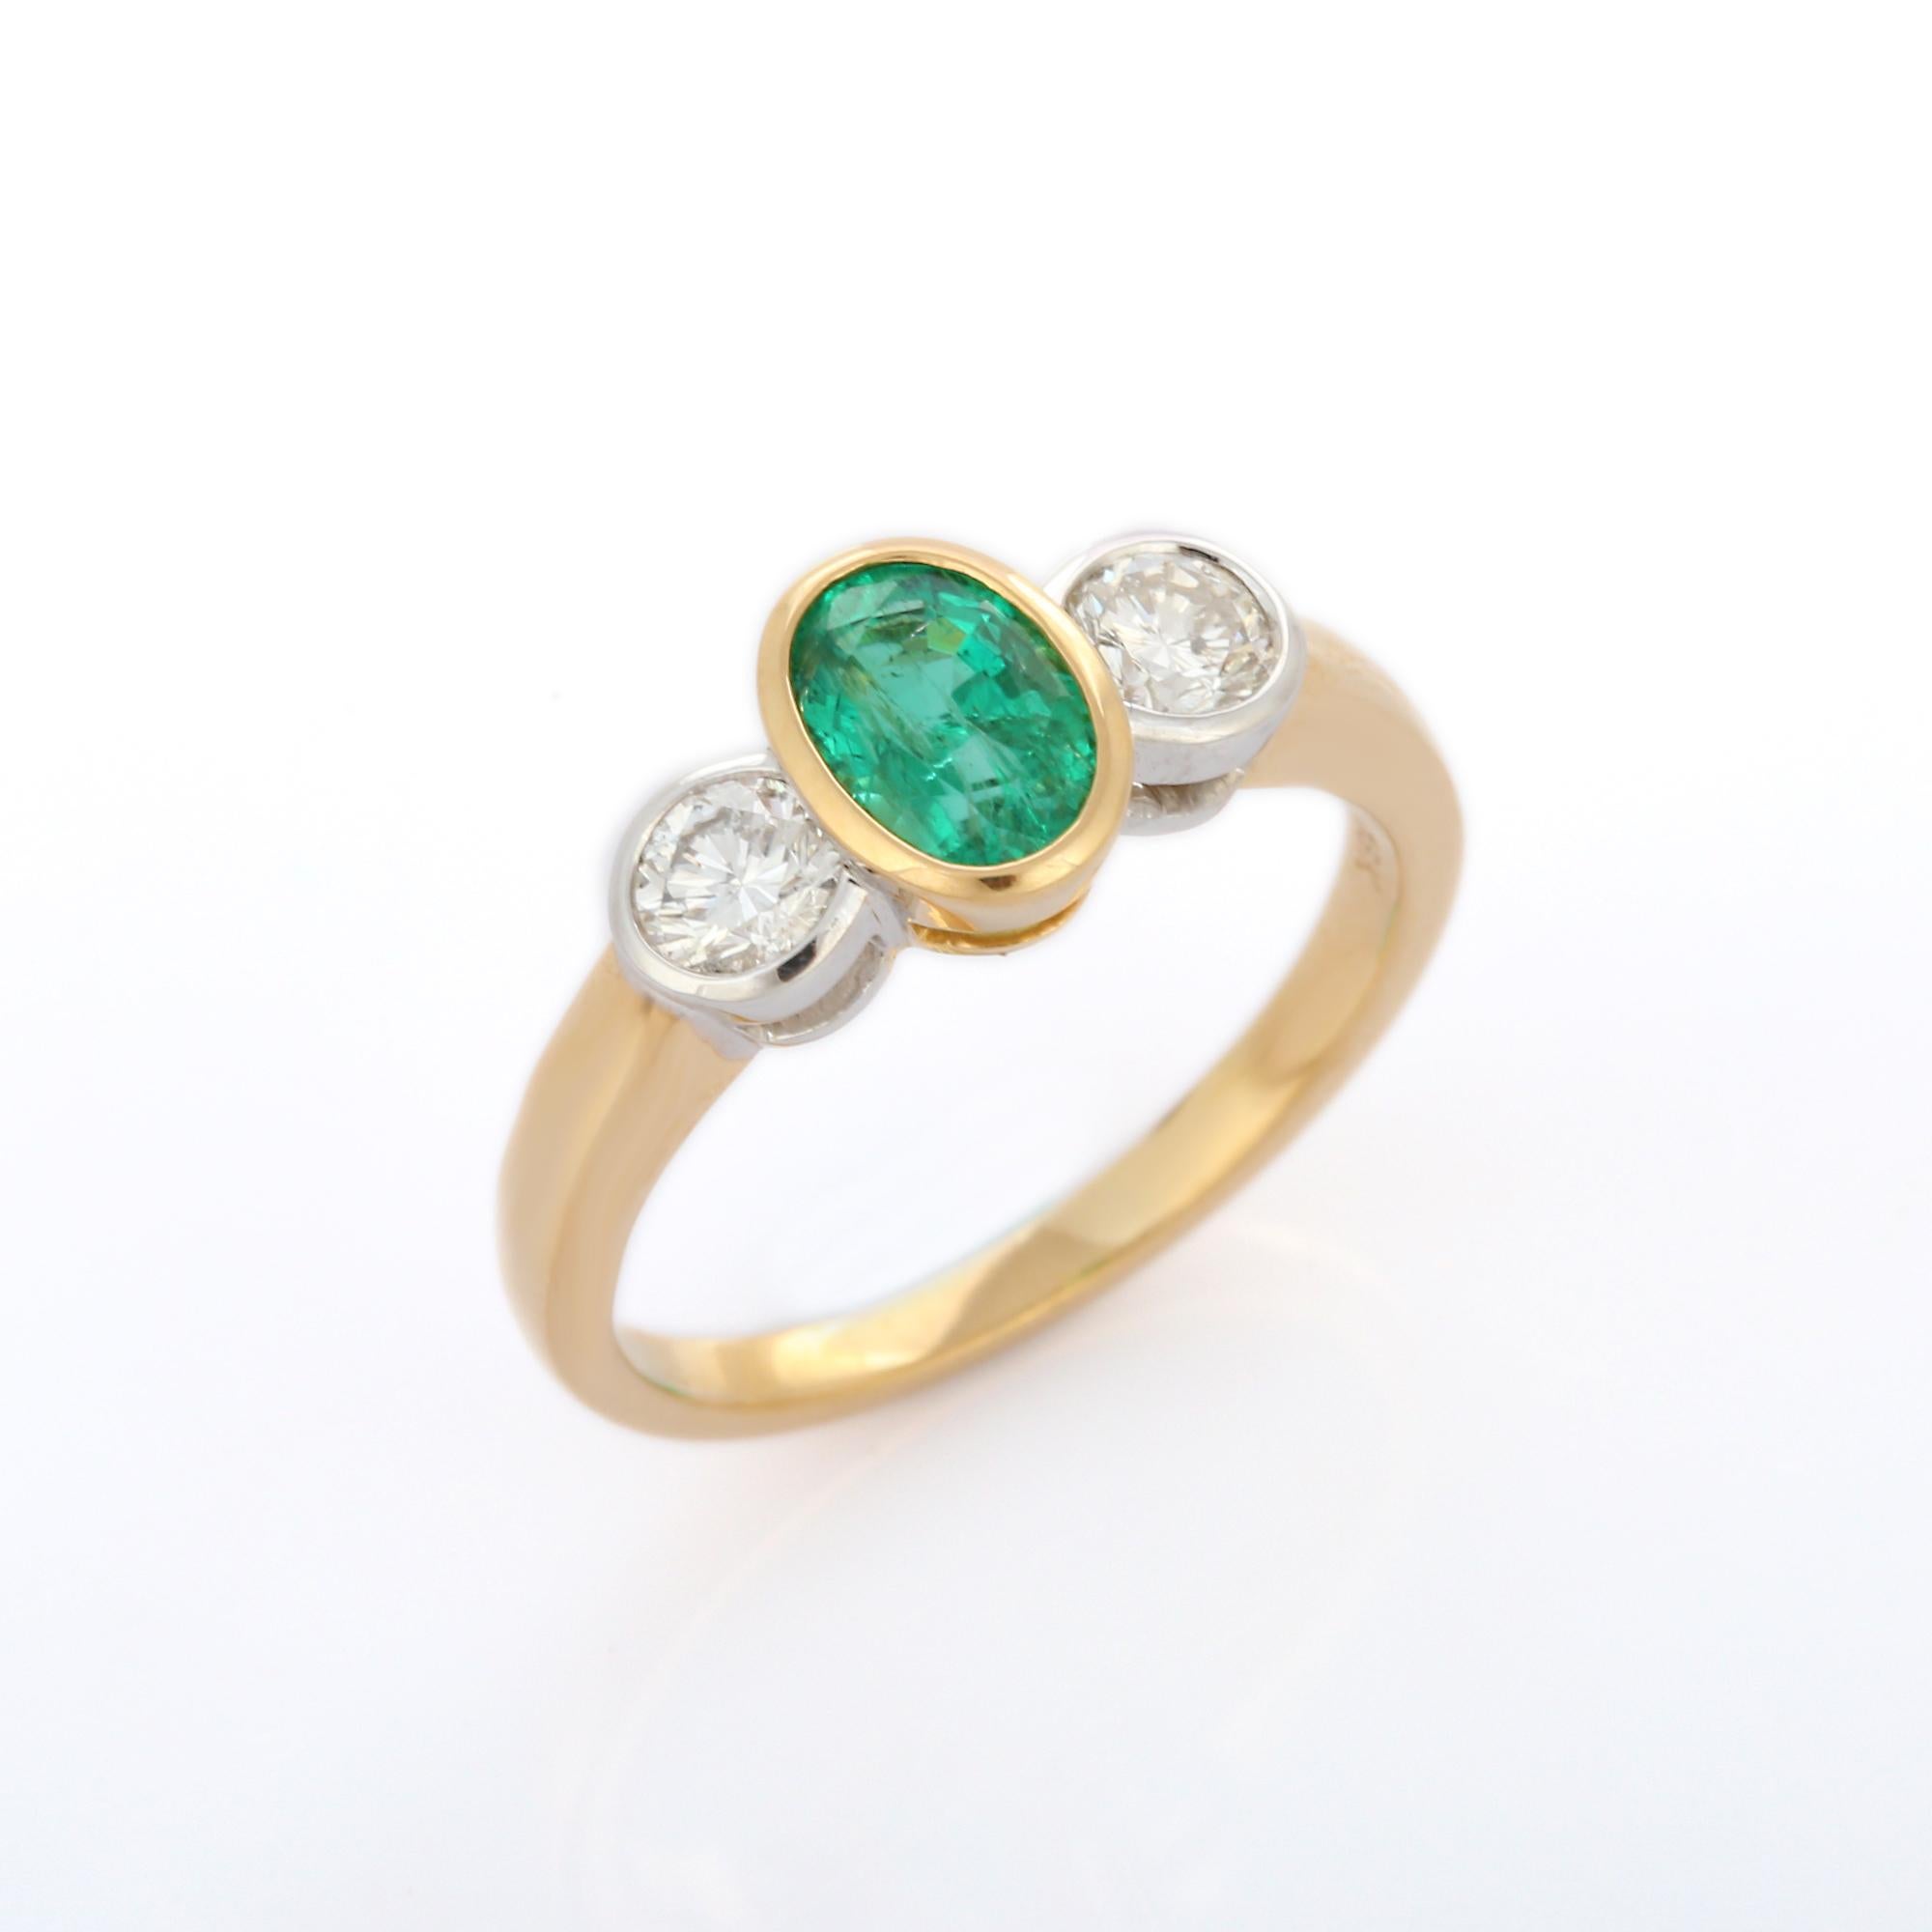 For Sale:  18K Solid Yellow Gold Bezel Set Oval Cut Emerald and Diamond Three Stone Ring  5